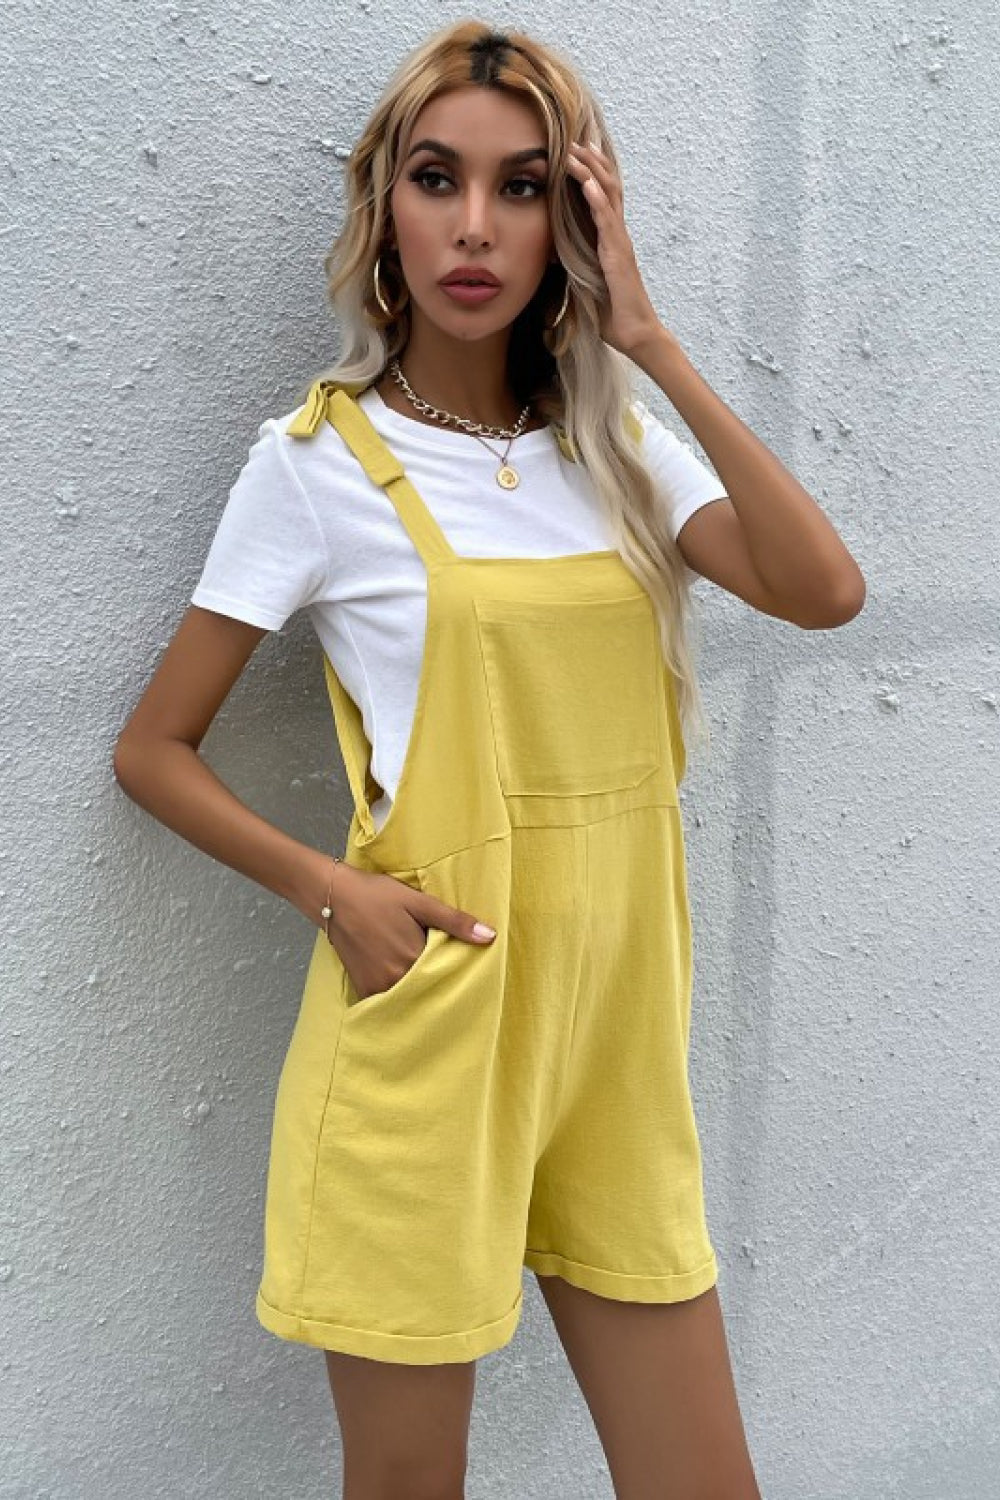 Tie Cuffed Short Overalls with Pockets - Women’s Clothing & Accessories - Overalls - 2 - 2024